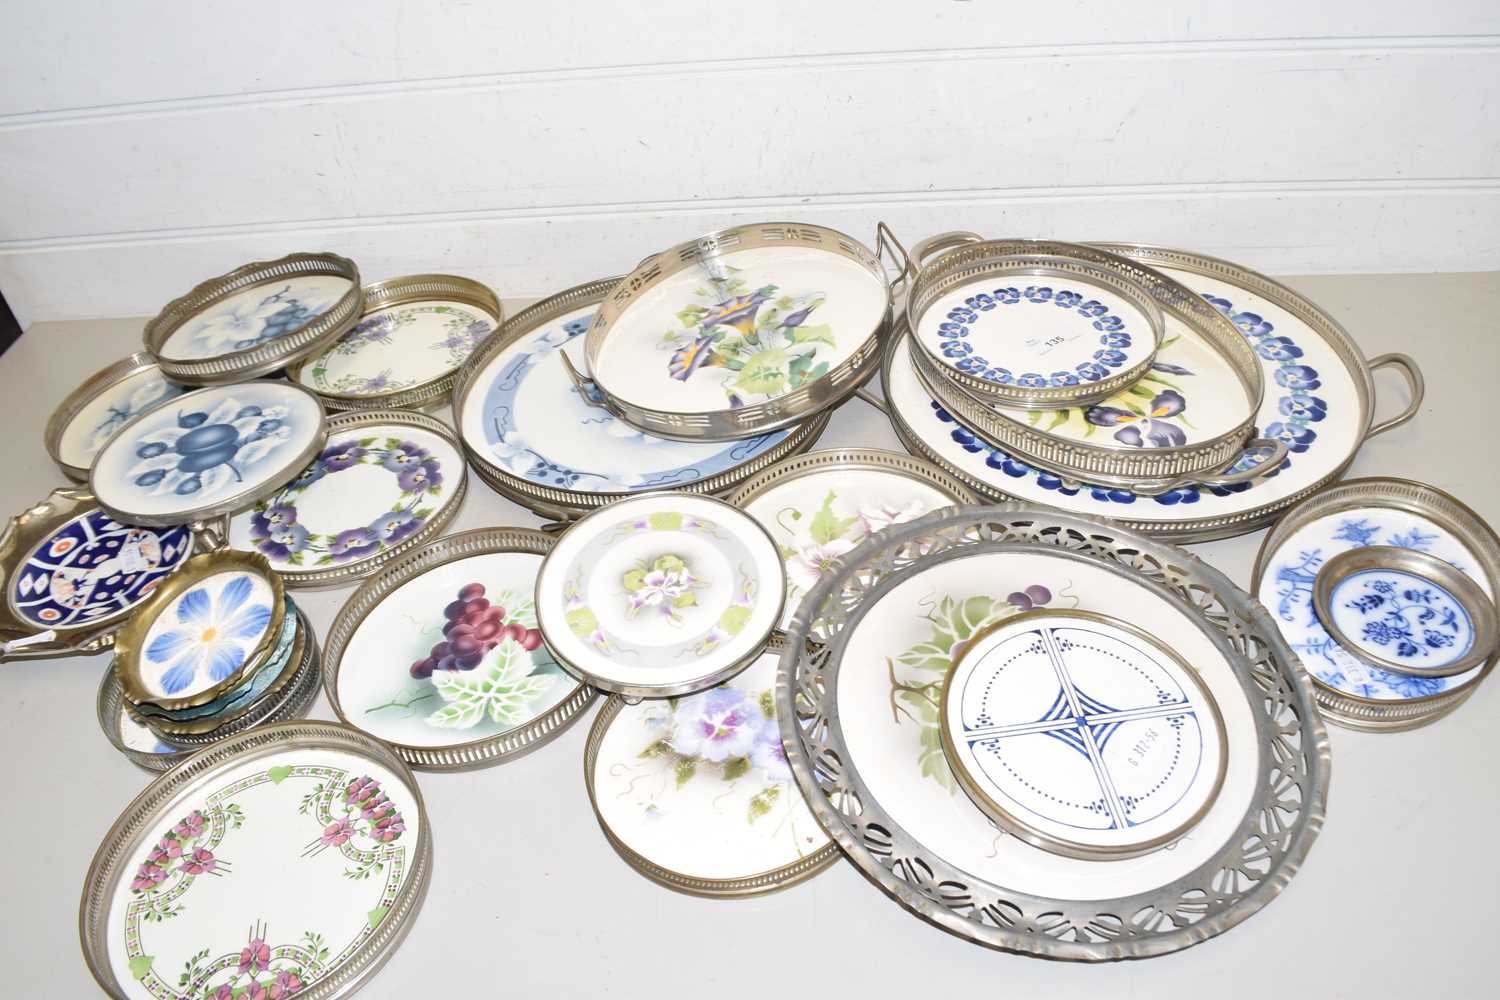 Mixed Lot: Continental porcelain and metal mounted serving trays, coasters and other similar items